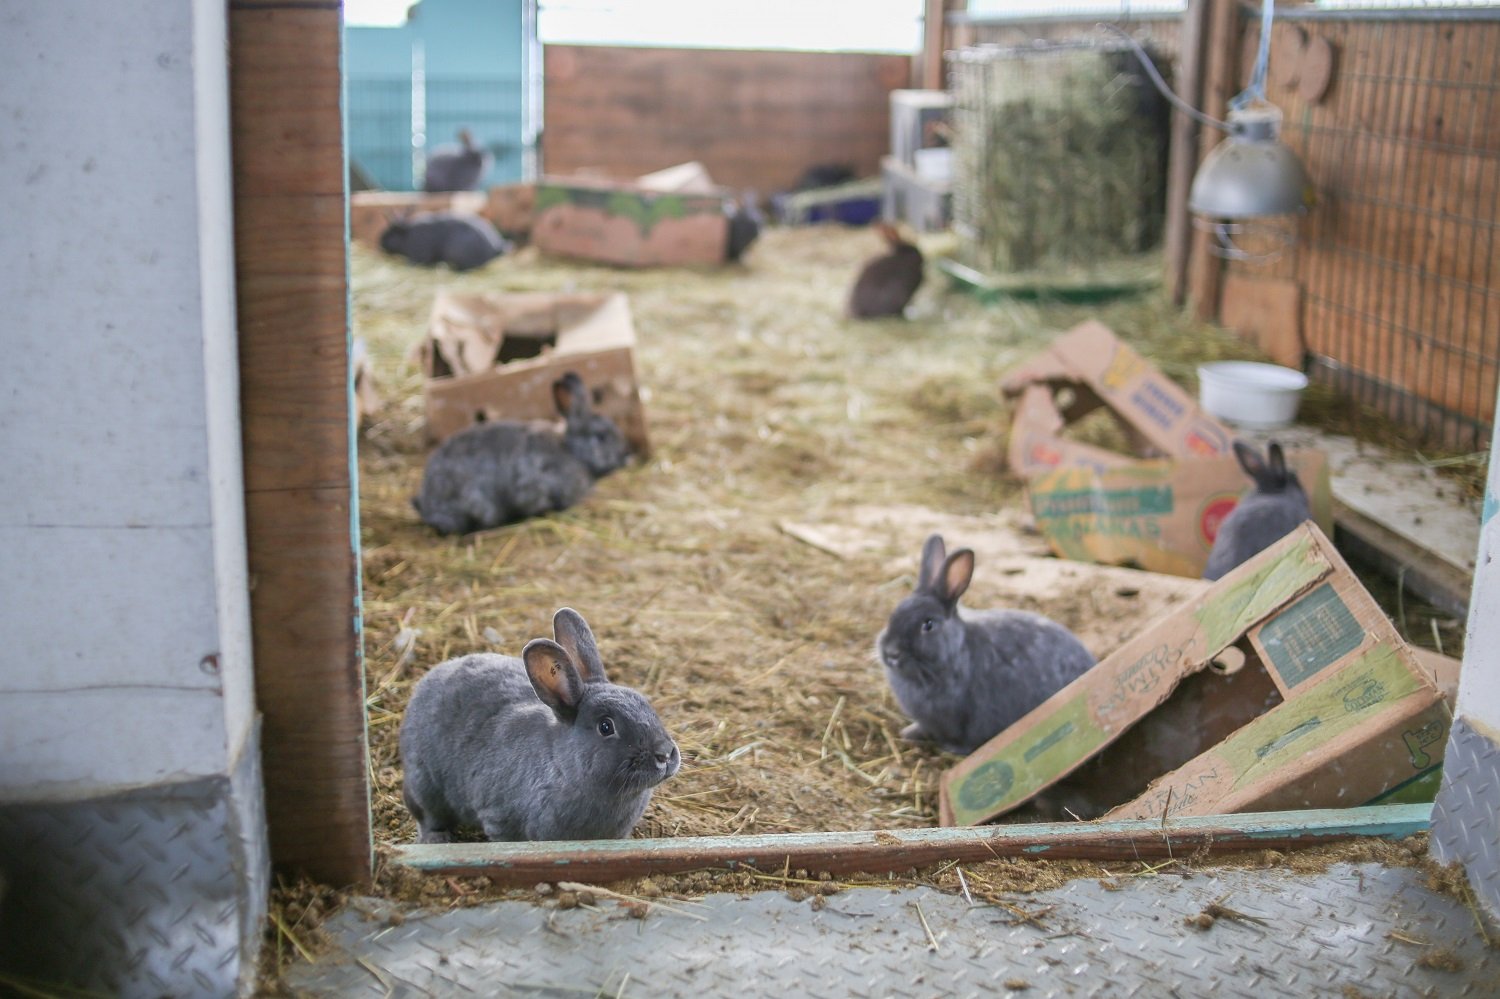 A view of an outdoor rabbit enclosure shows eight grey rabbits in an outdoor area surrounded by a brown wooden fence. The ground is lined with hay and brown cardboard produce boxes. In the background, the sky is white.